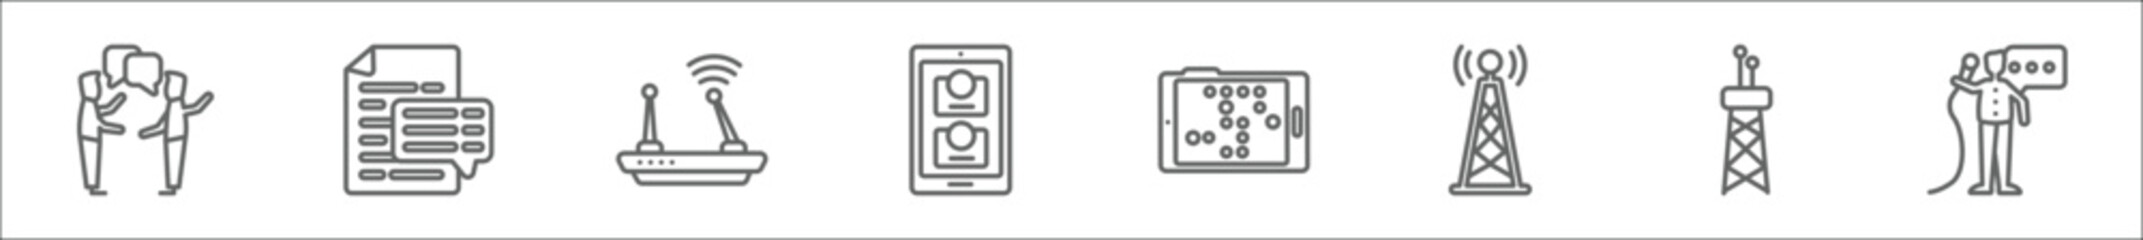 outline set of communication line icons. linear vector icons such as talking, text lines, modem, contacts, braille, transmitter, radio antenna, news reporter